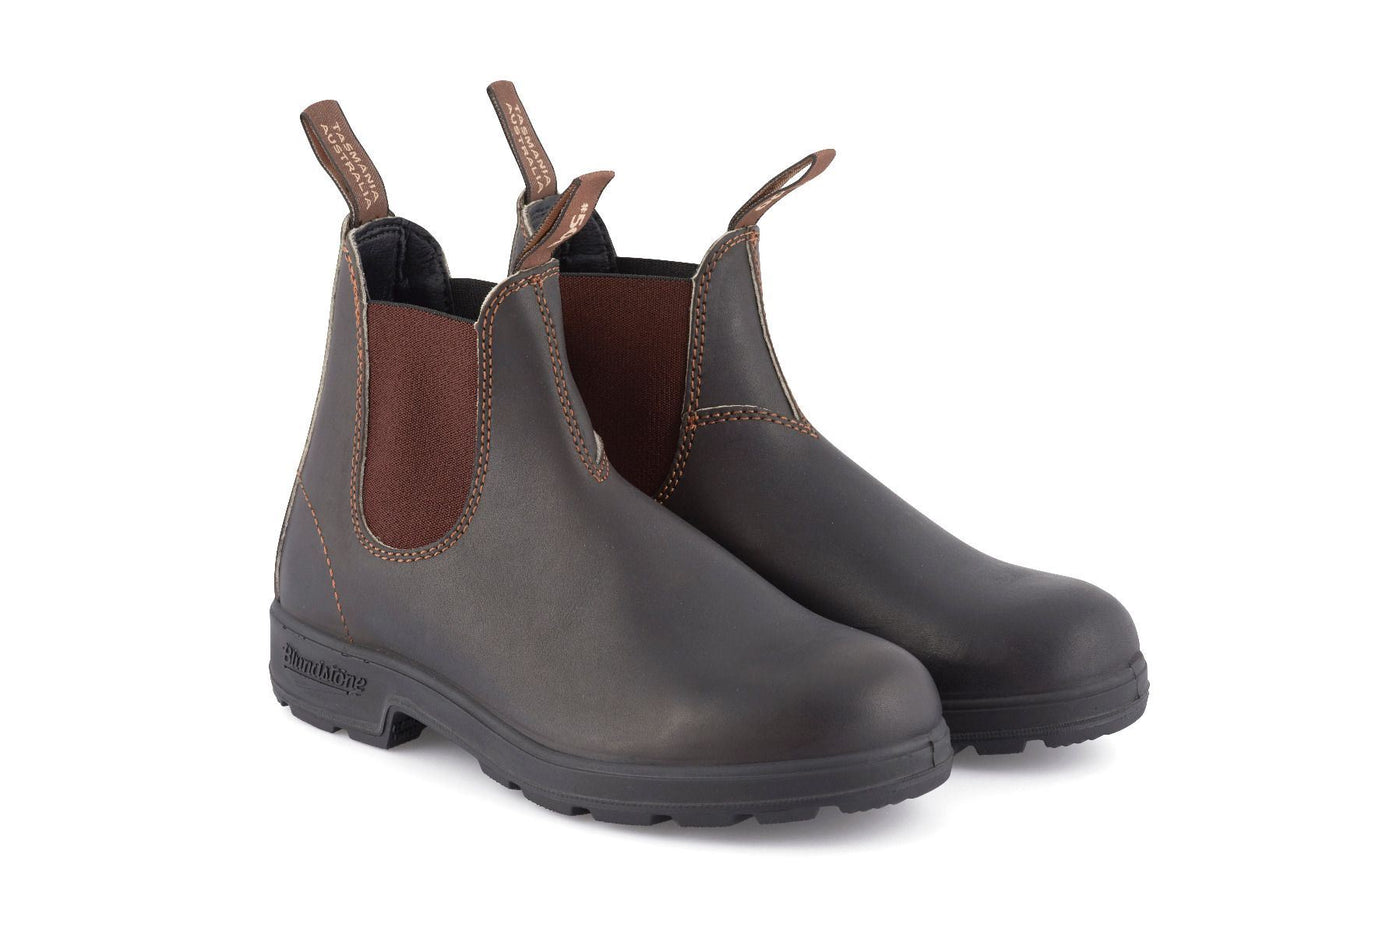 Blundstone #500 Stout Brown Chelsea Boot